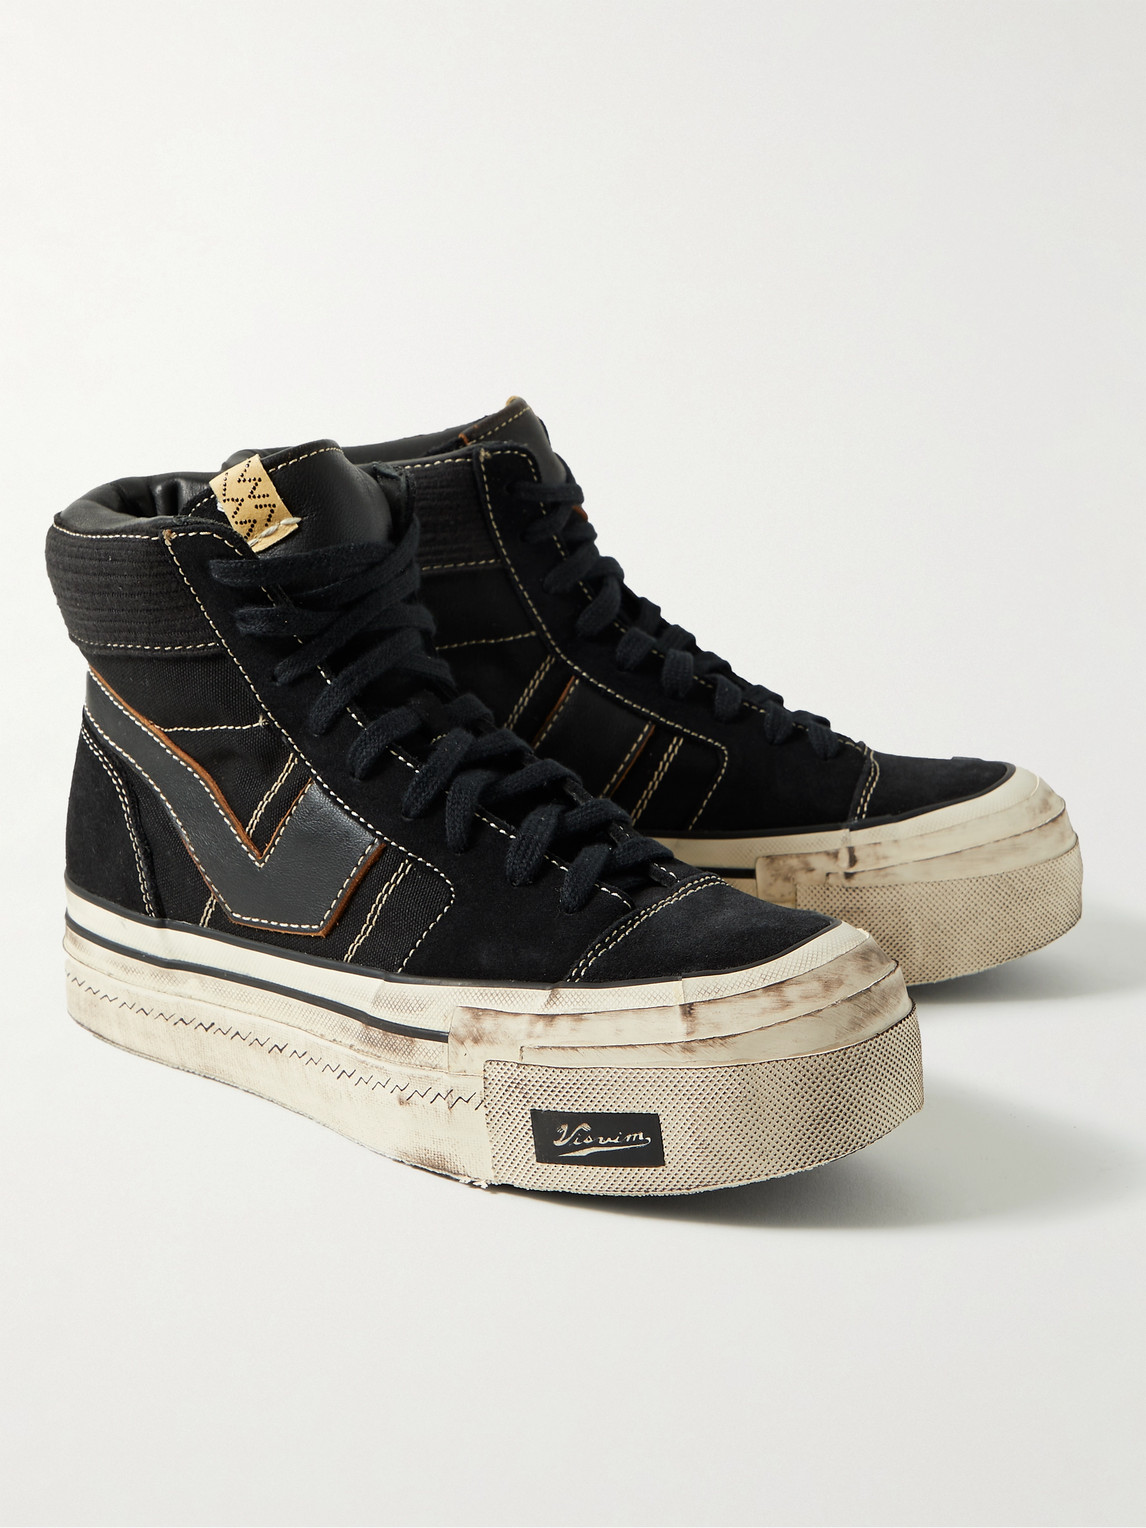 VISVIM ZEPHYR HI DISTRESSED LEATHER-TRIMMED COTTON-CANVAS HIGH-TOP SNEAKERS 